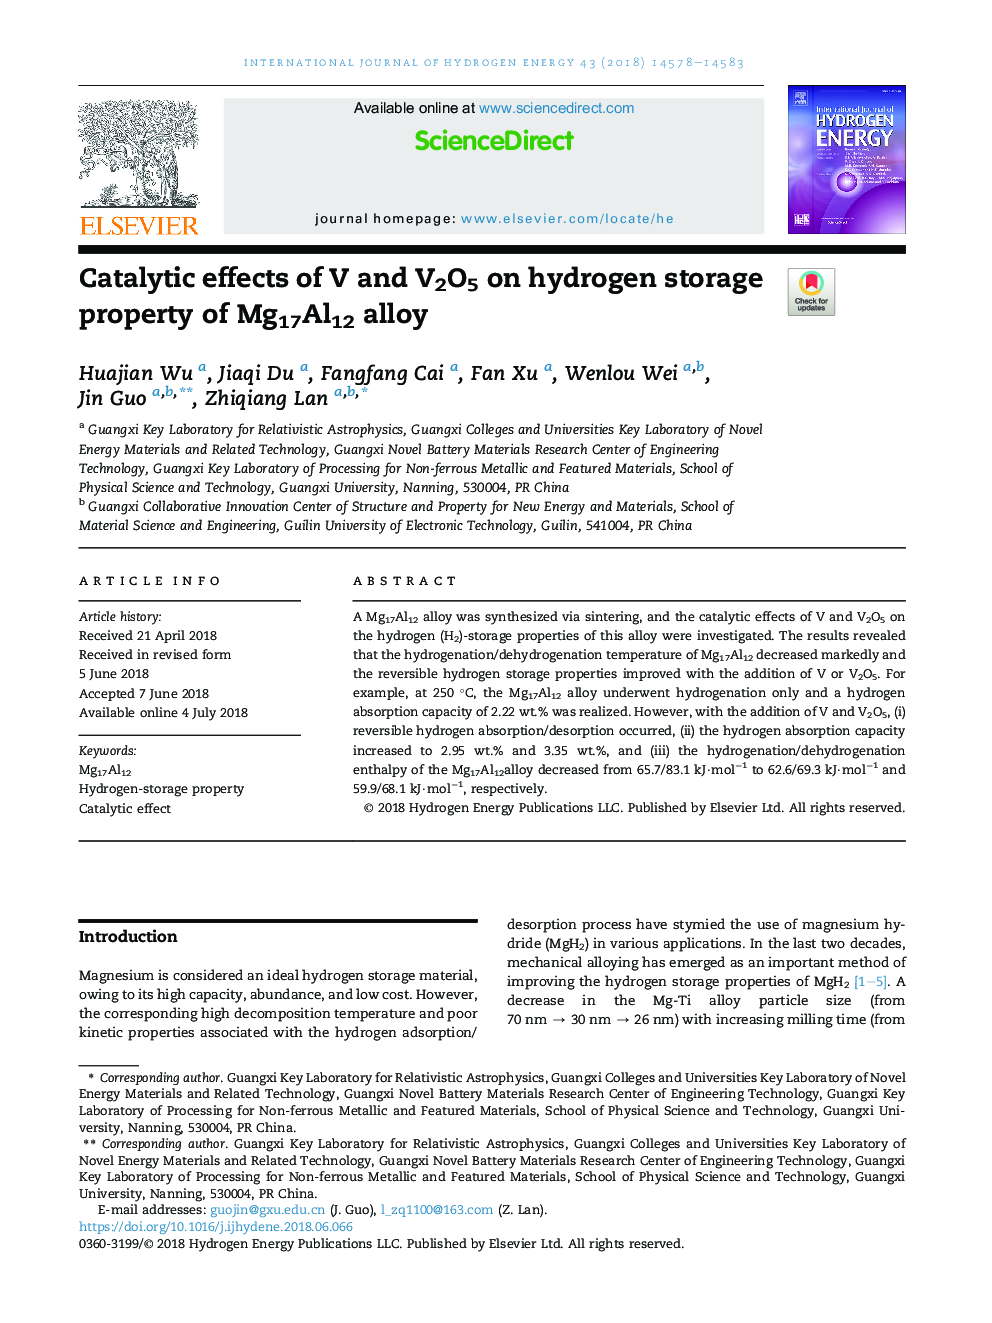 Catalytic effects of V and V2O5 on hydrogen storage property of Mg17Al12 alloy